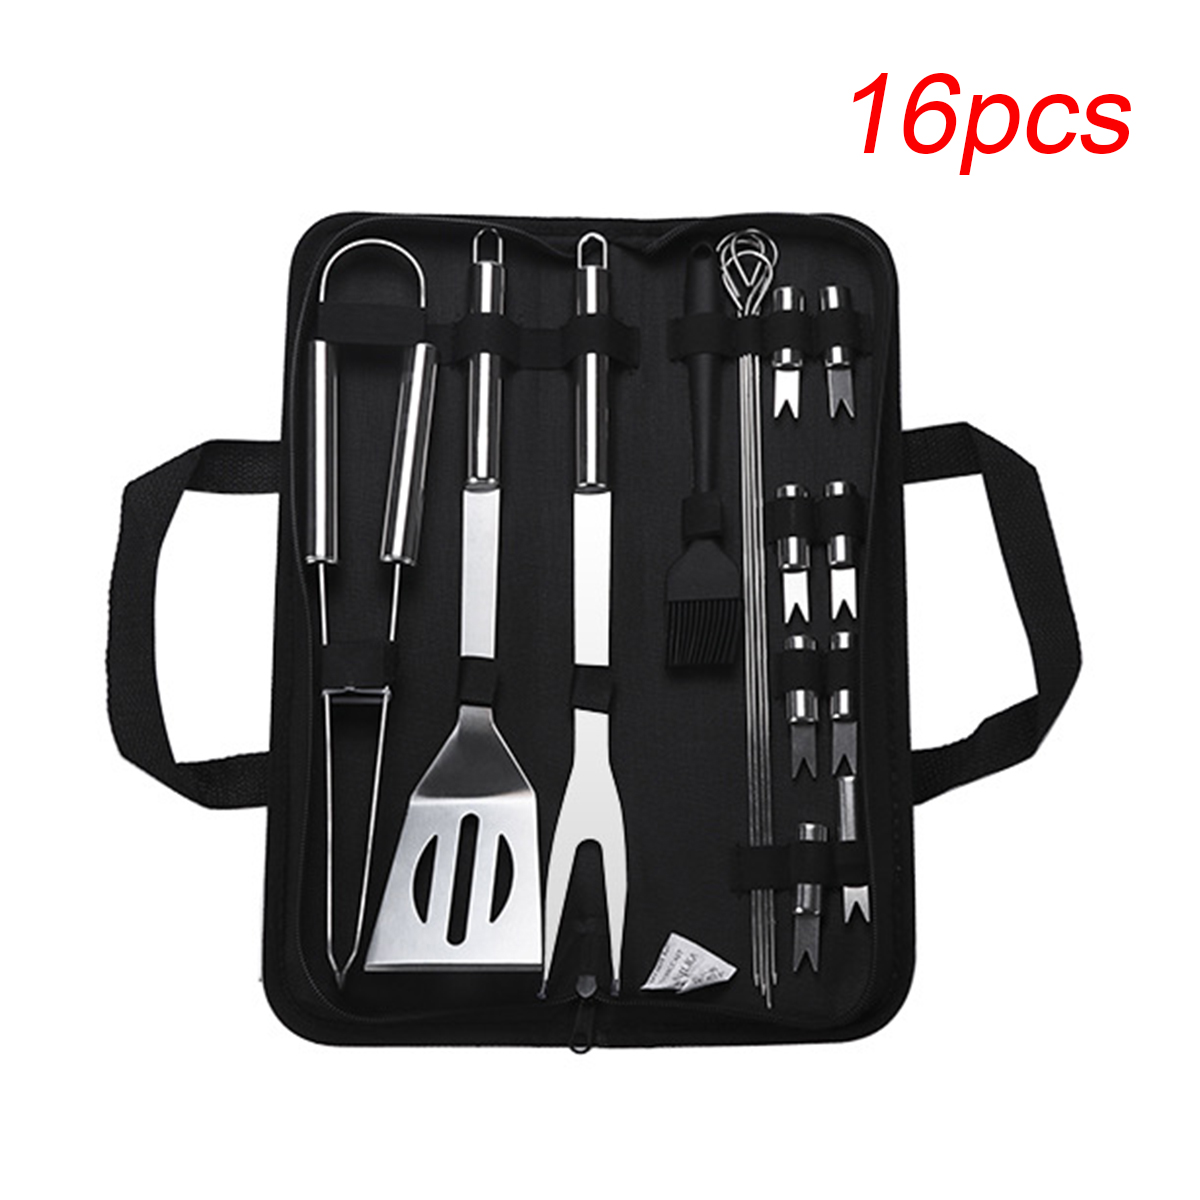 Stainless-Steel-BBQ-Tools-Set-Barbecue-Grilling-Utensil-Accessories-Camping-Outdoor-Cooking-1676473-4